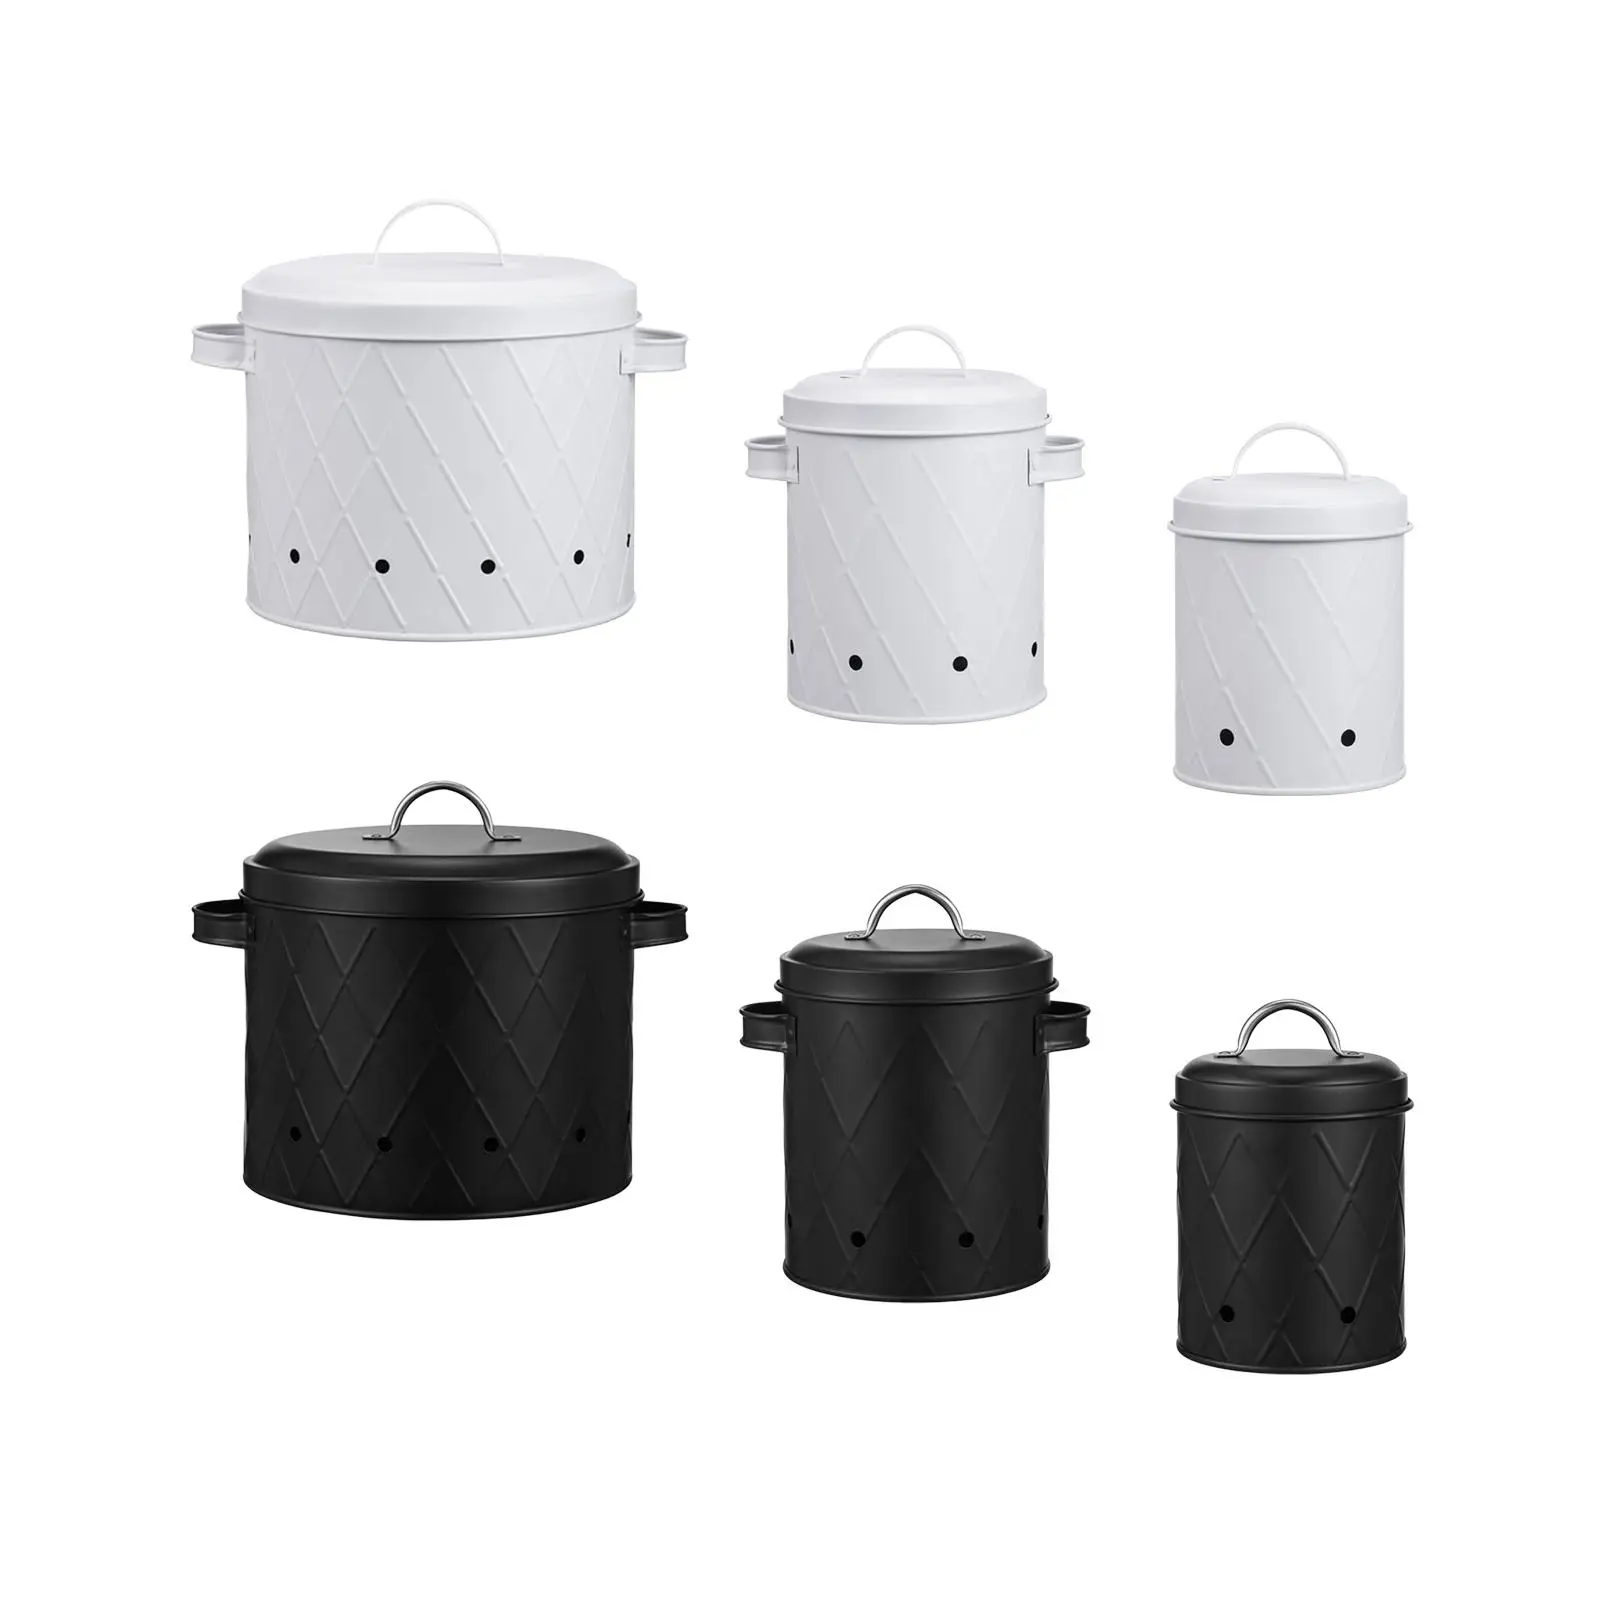 Onion Potato and Garlic Tin and Aerating Holes with Dual Handles Food Storage Container Tin Outdoor Activities Slow Cooking